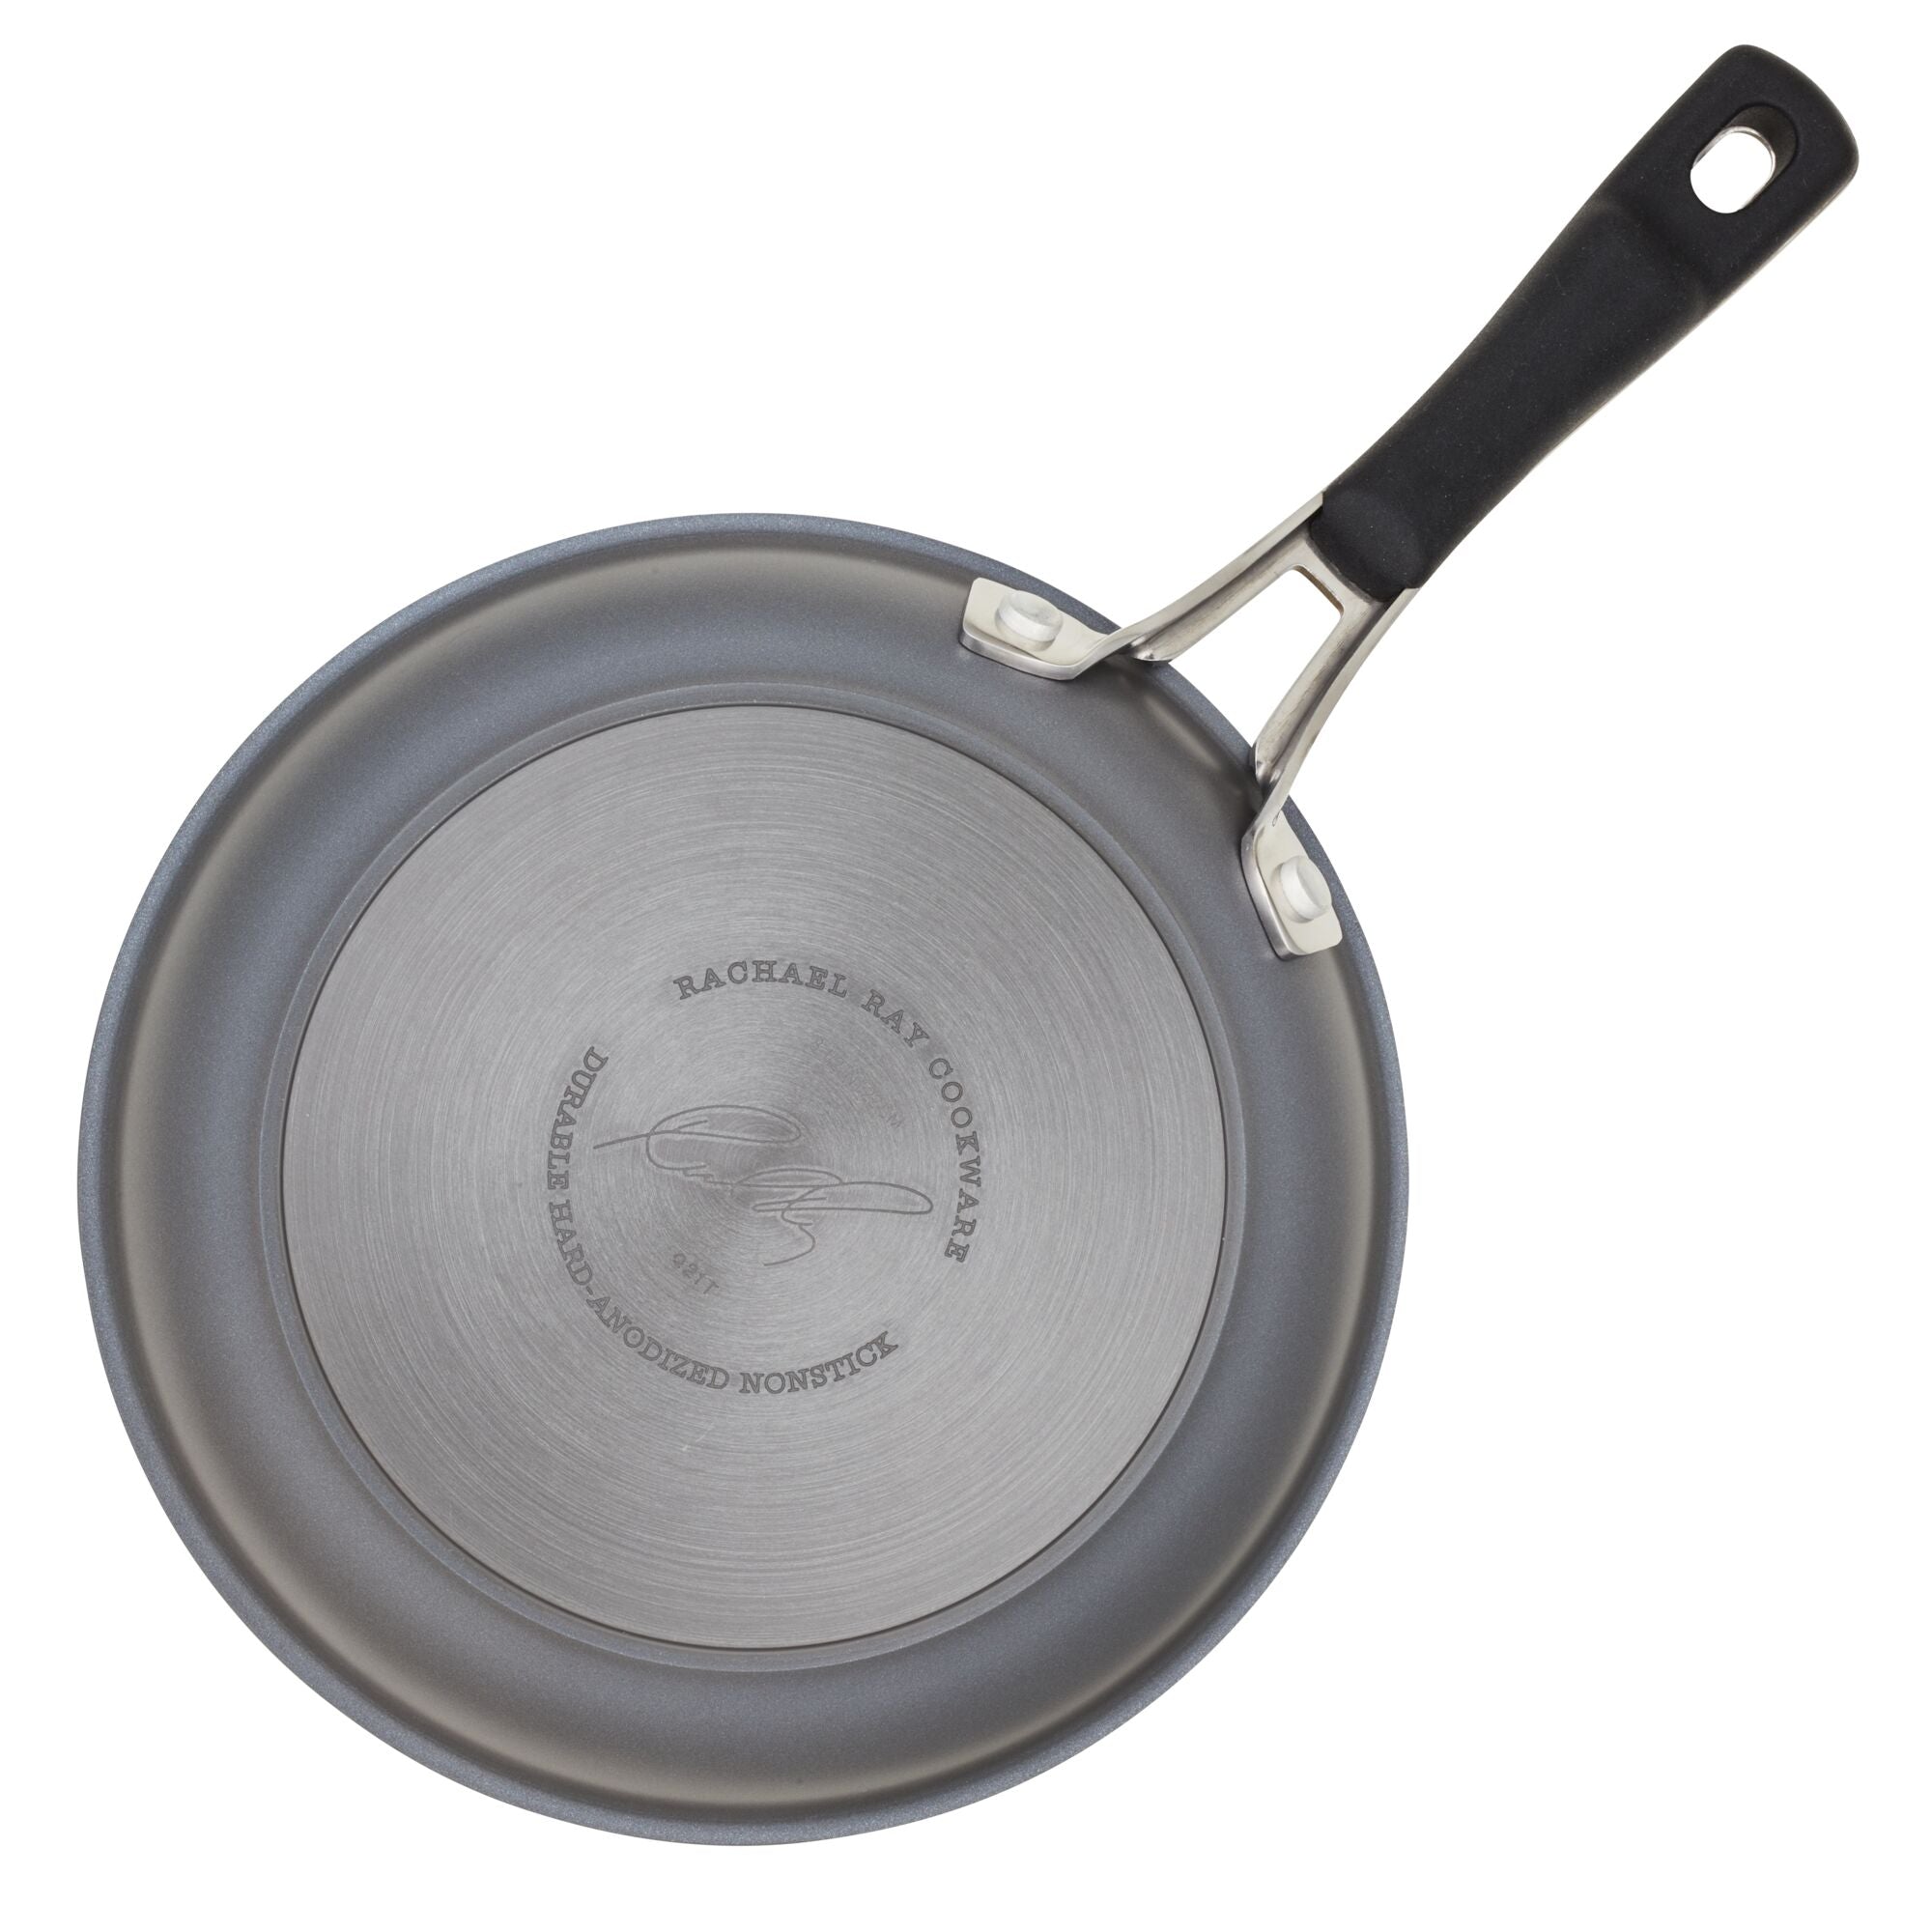 10-Inch Hard Anodized Nonstick Frying Pan